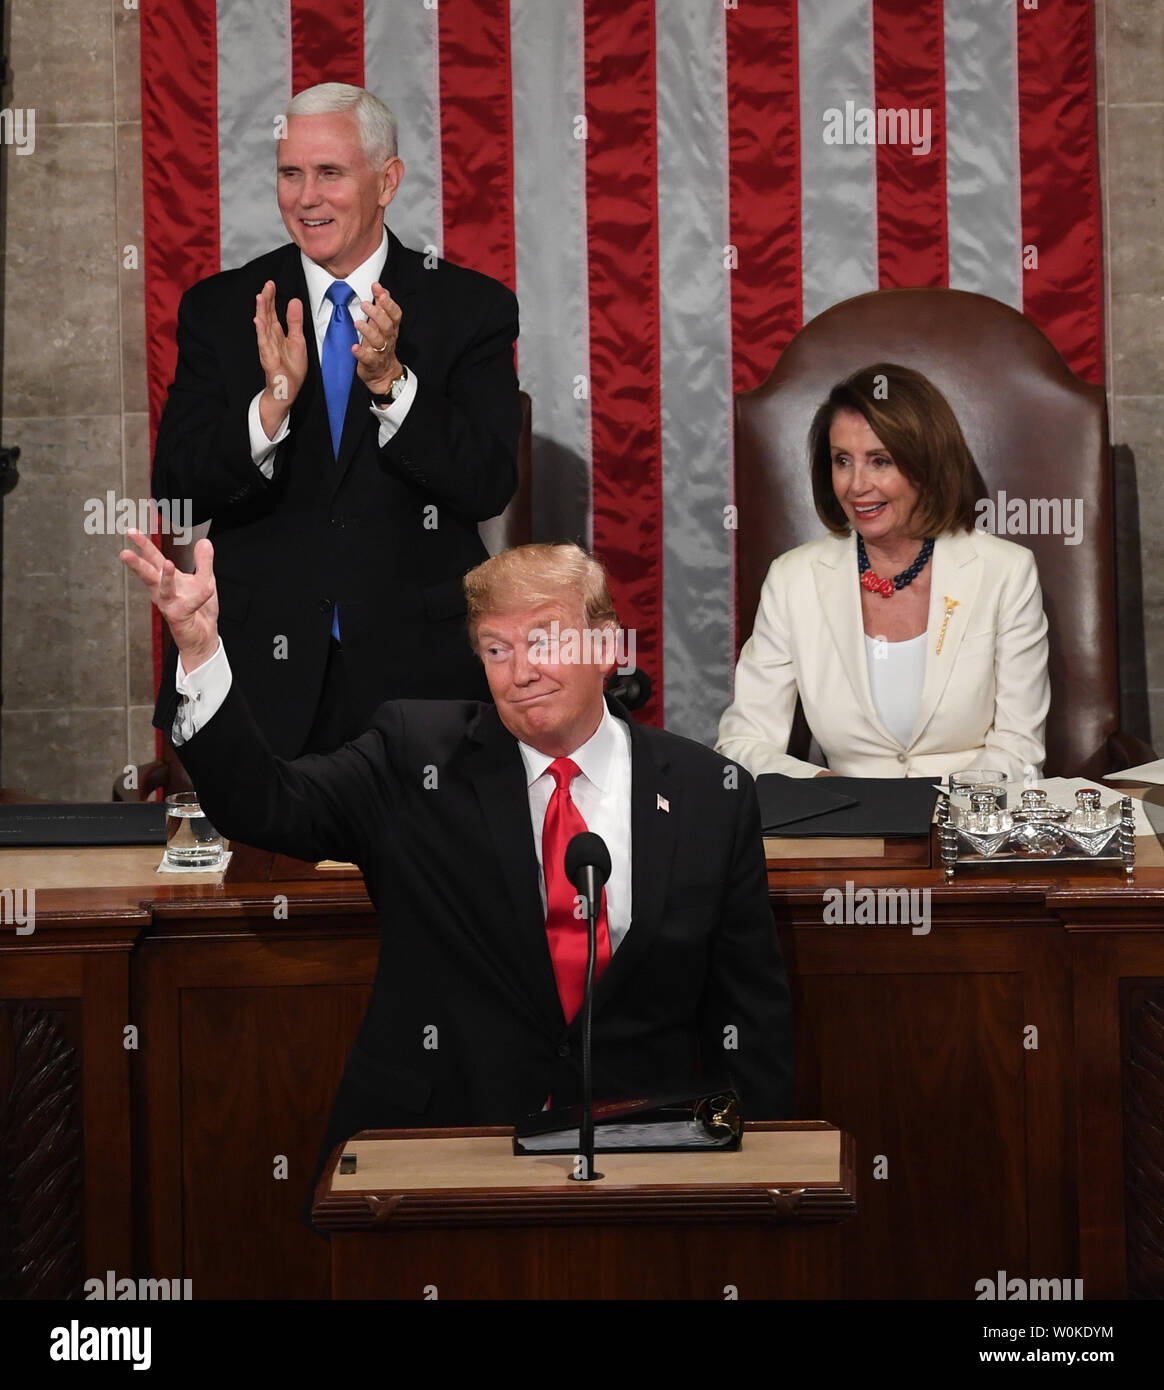 President Donald Trump delivers his State of the Union address to a joint session of Congress in the House Chamber of the U.S. Capitol in Washington, DC on February 5, 2019. Vice President Mike Pence stands applauding while Speaker of the House Nancy Pelosi remains seated. Photo by Pat Benic/UPI Stock Photo